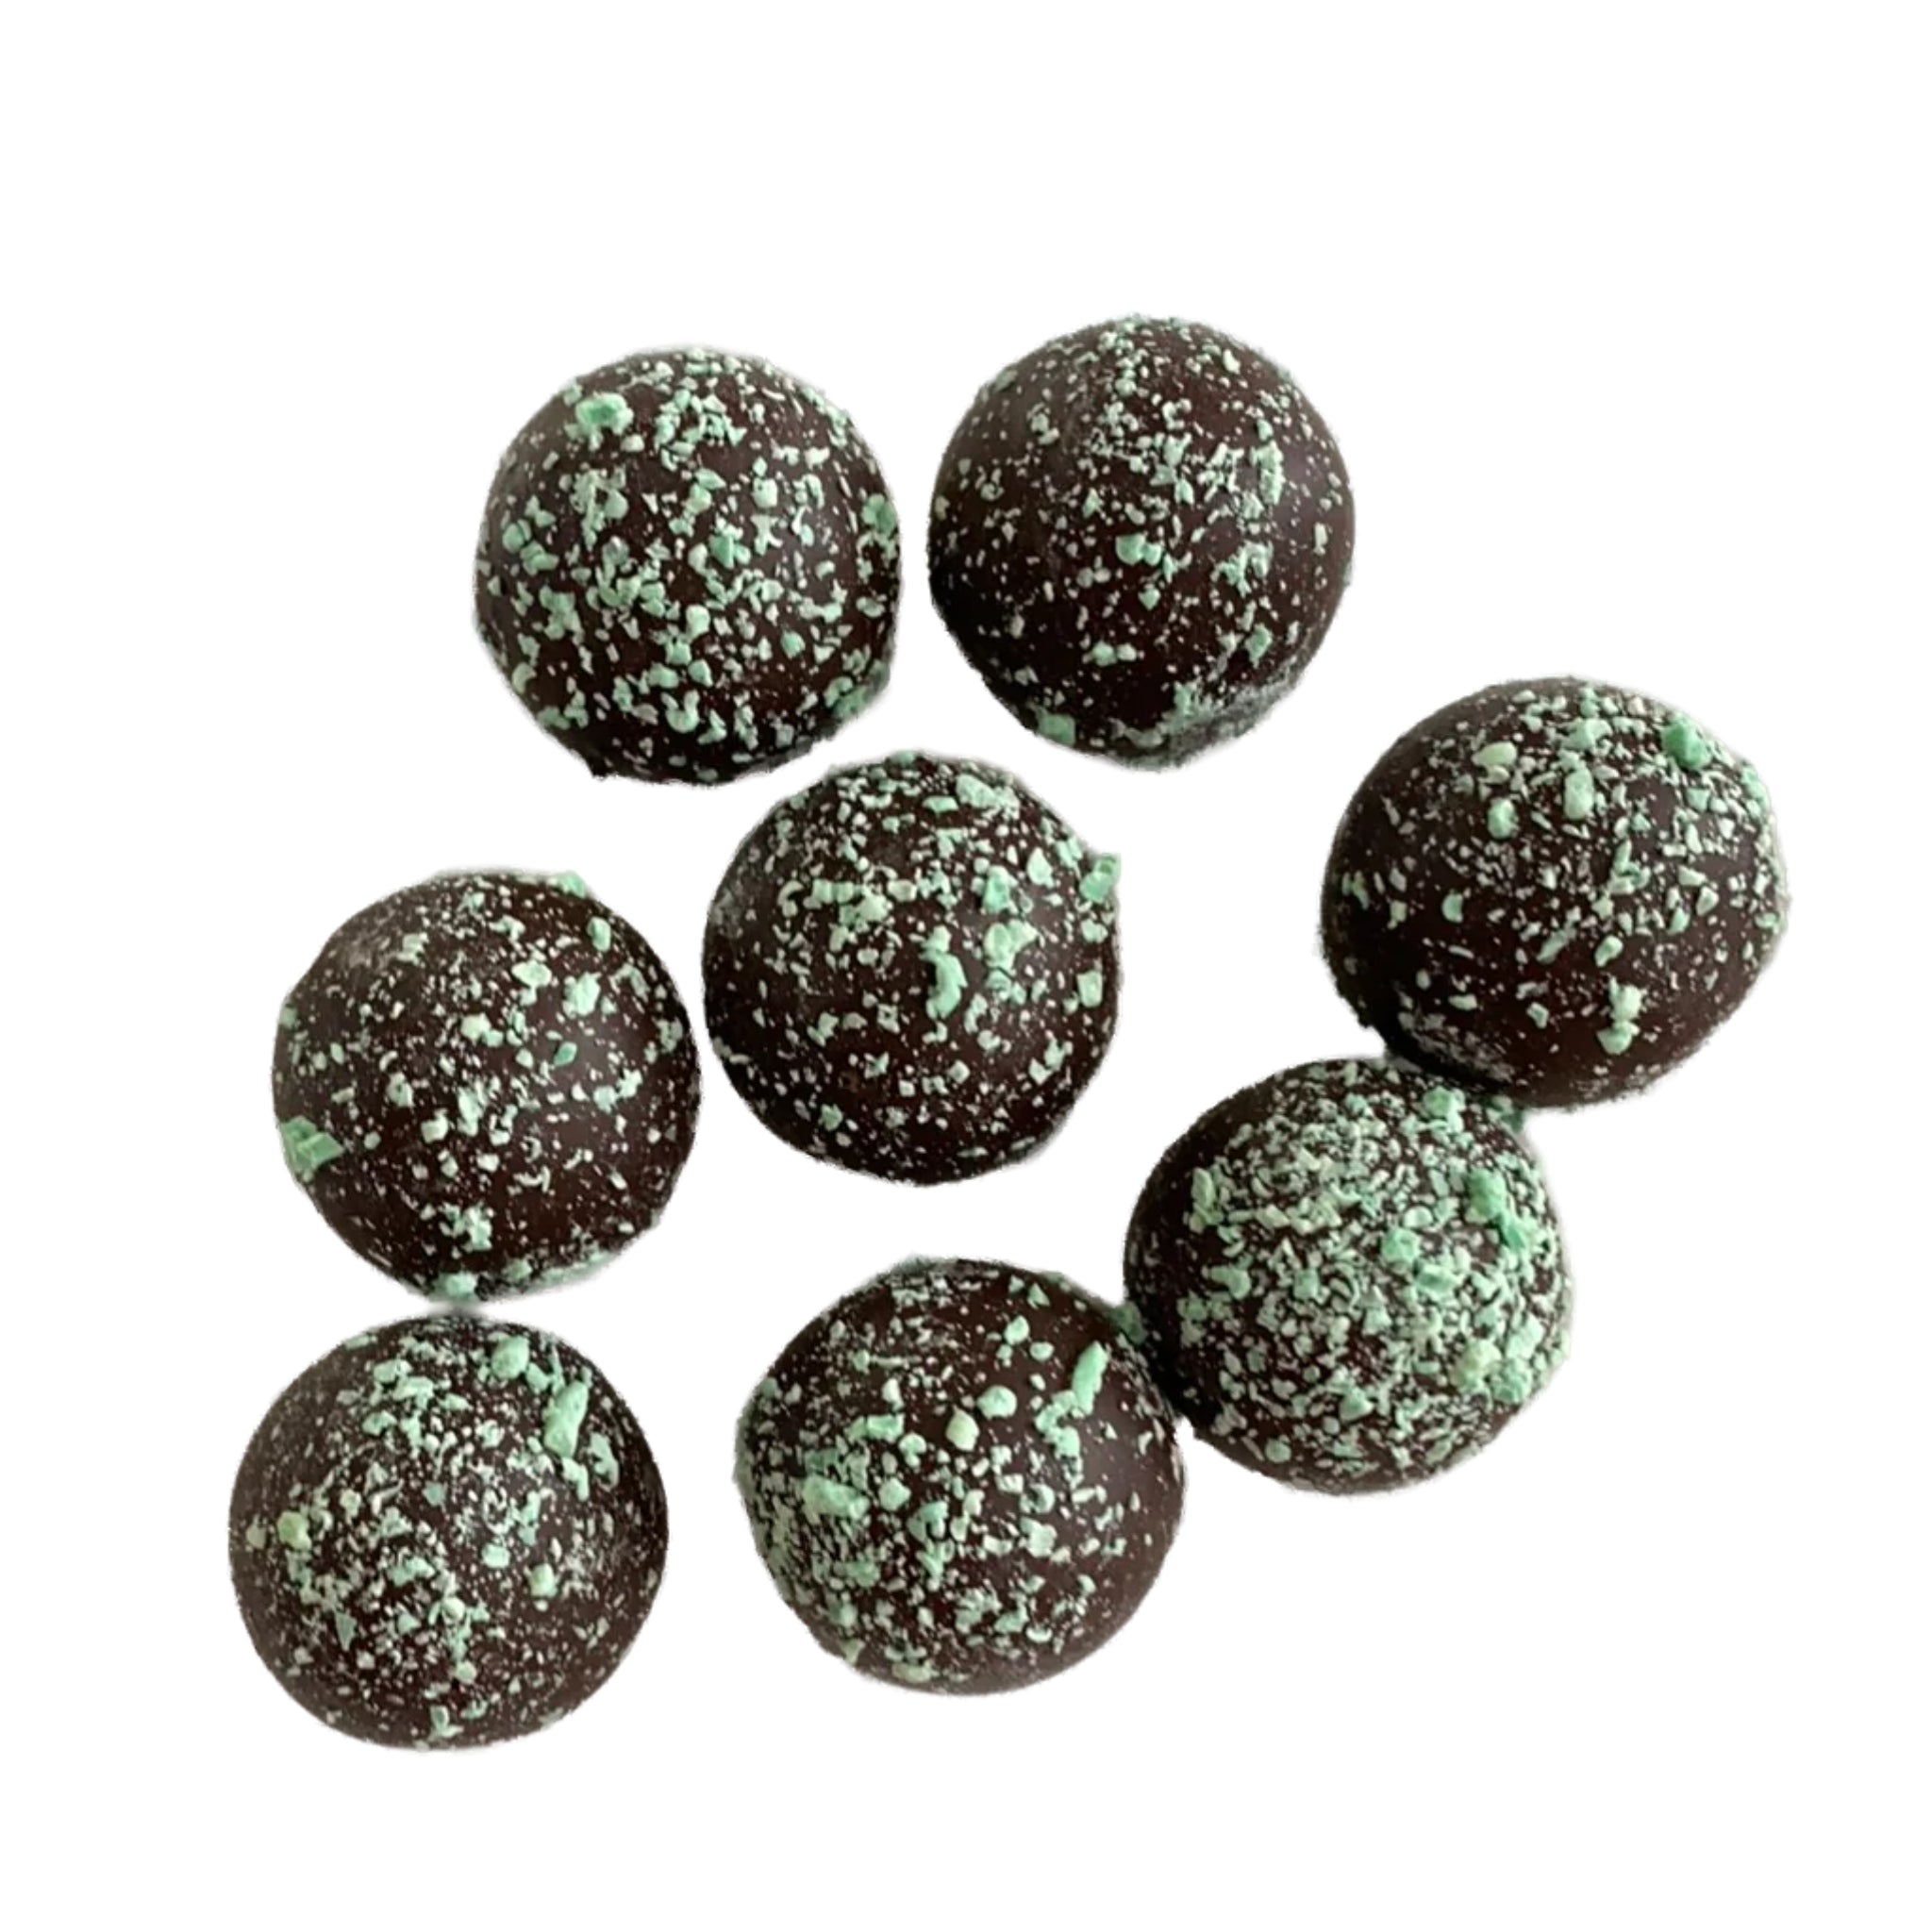 Round Marble Size dark chocolate balls with green sprinkles on top 